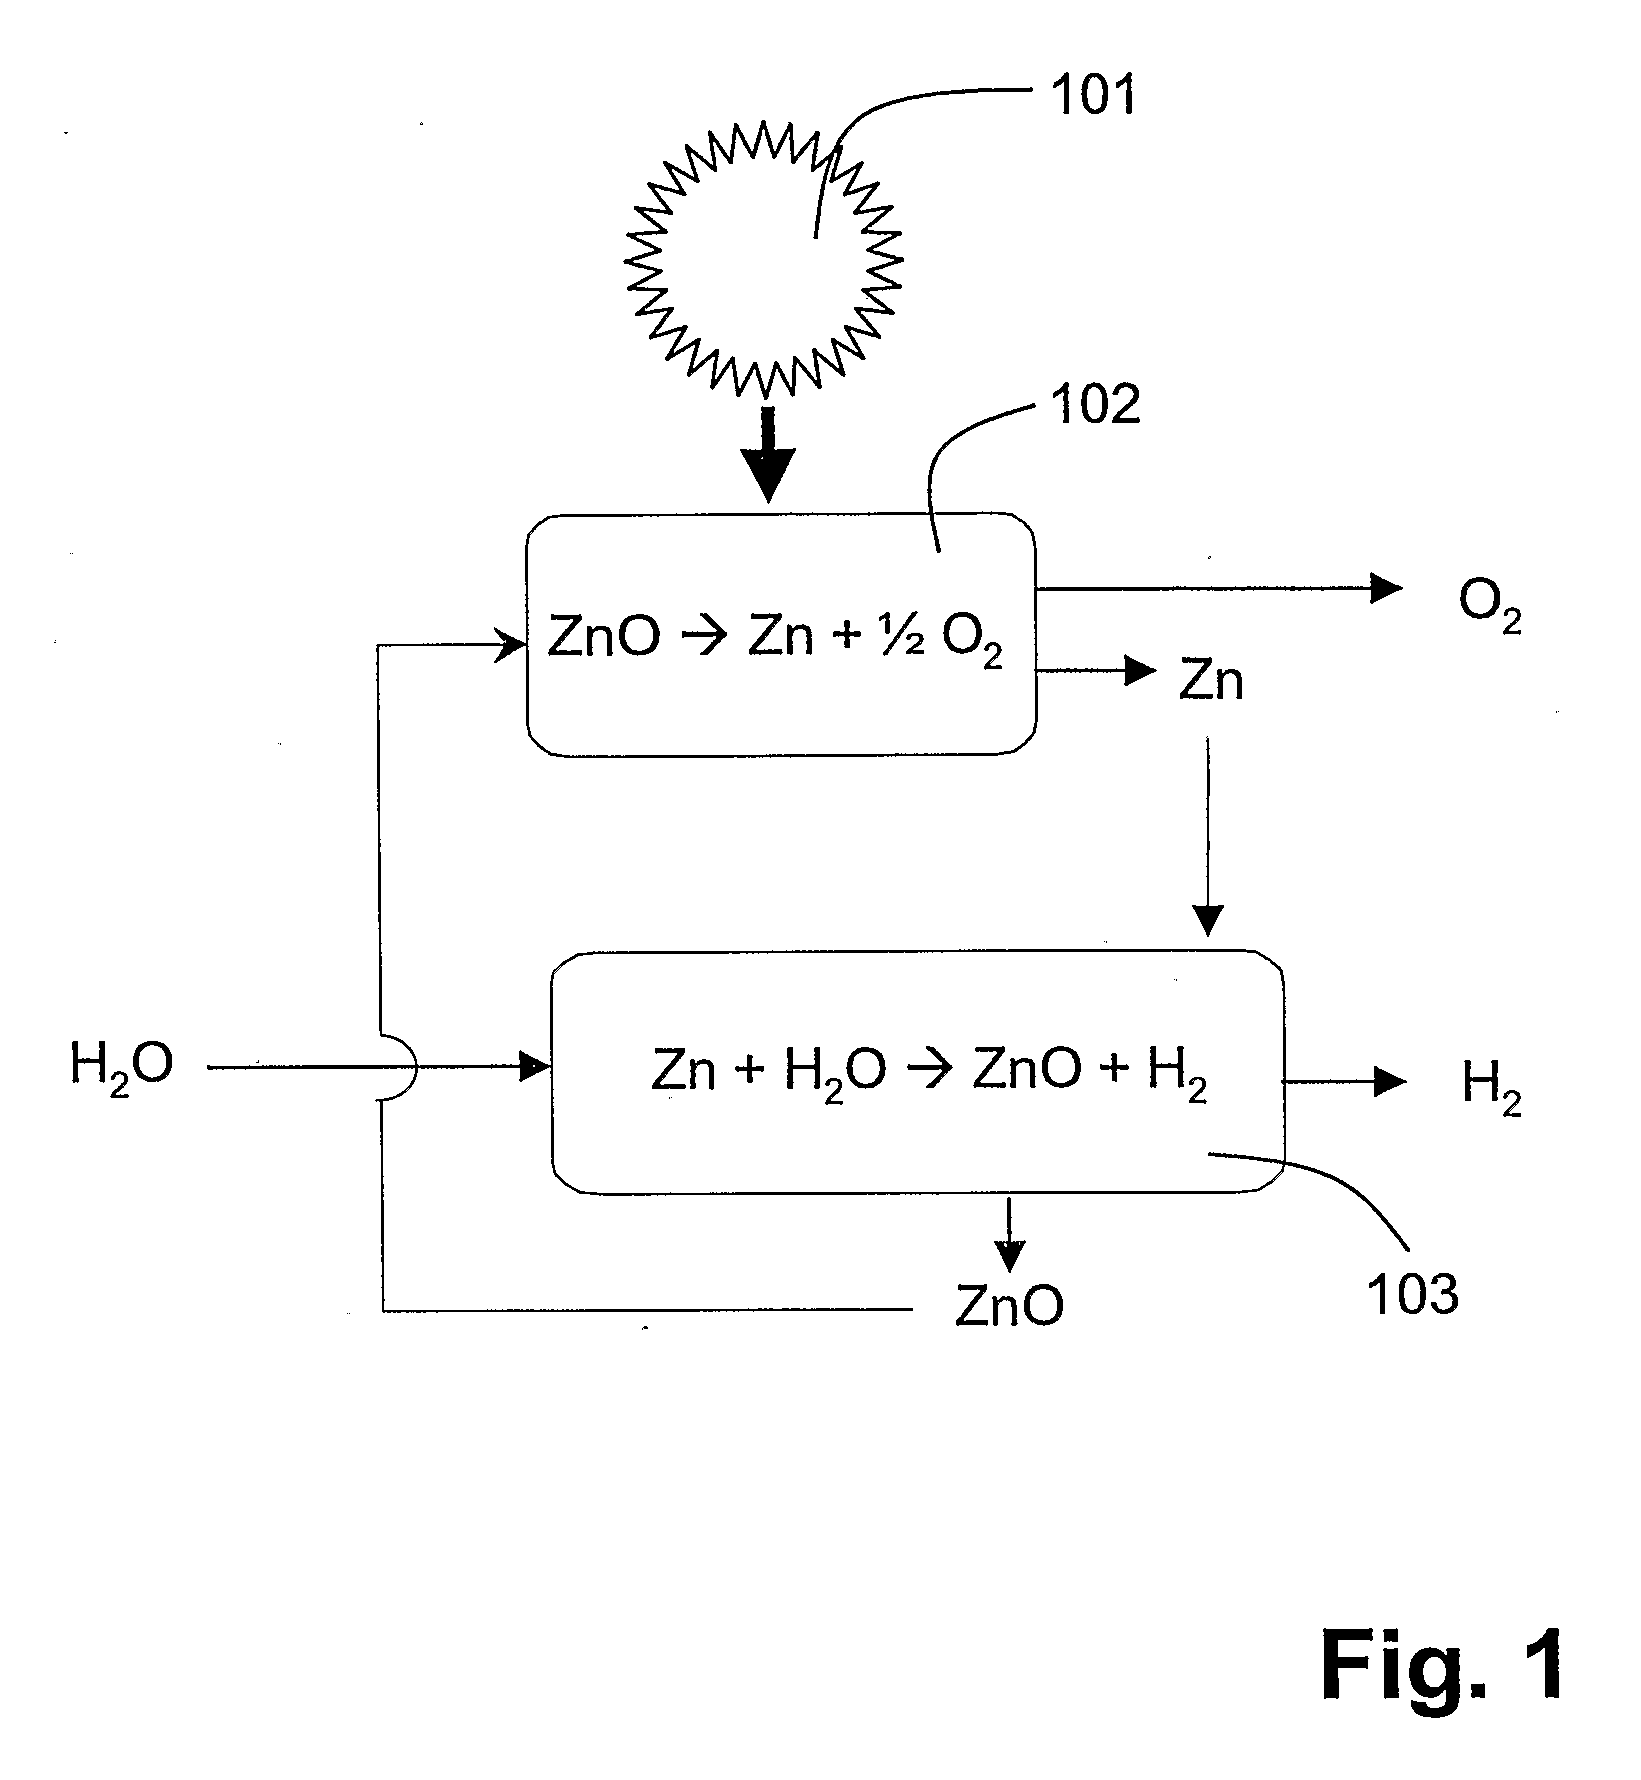 Process and apparatus for prodcing concrrently hydrogen or ammonia and metal oxide nanoparticles